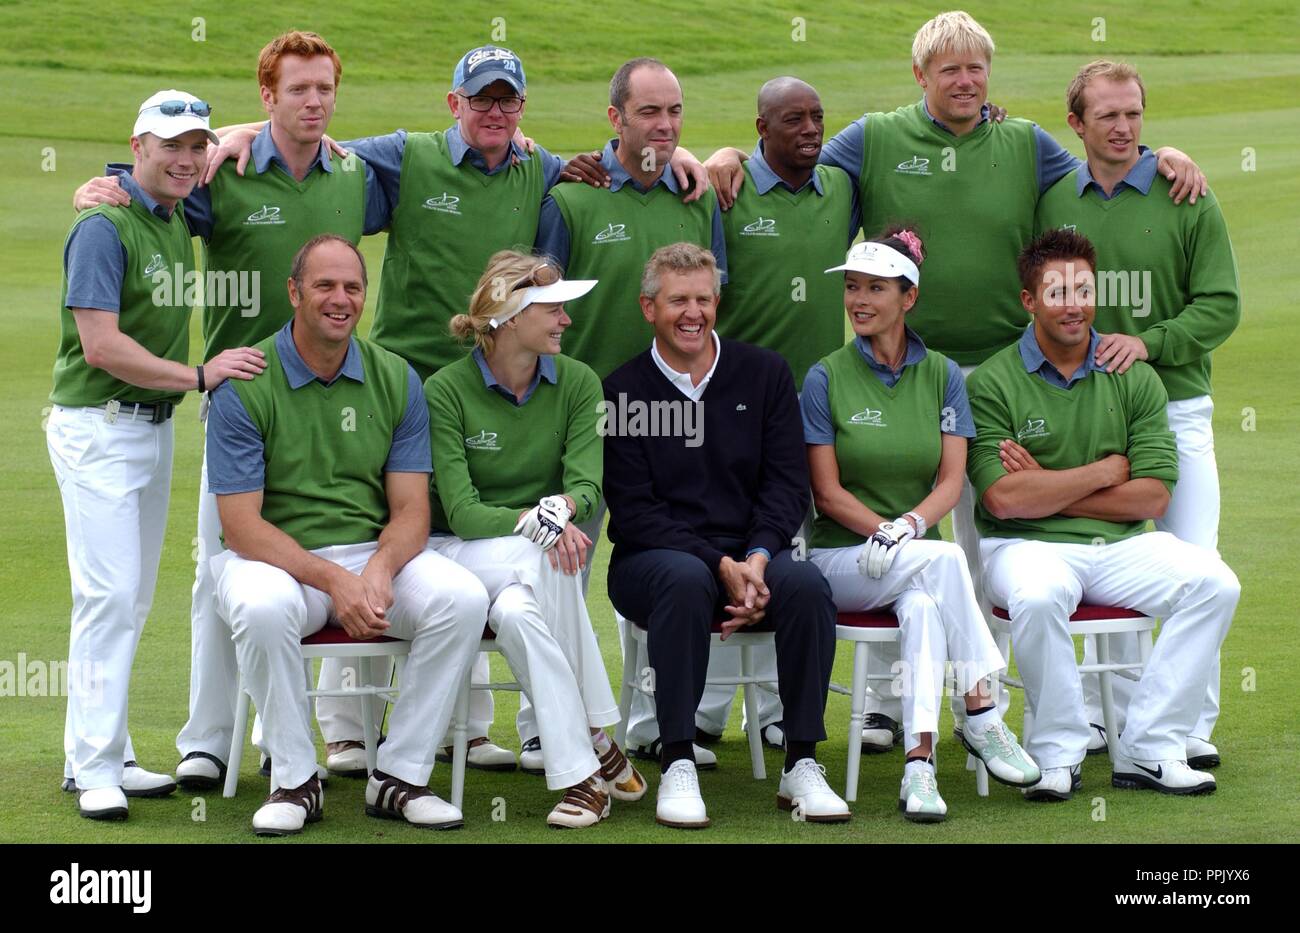 Sky One Allstar Cup at The Celtic Manor Resort, Newport, ( Saturday 27/8/05 ). The European Team.  Left to right standing, Ronan Keating, Damian Lewis,  Chris Evans, James Nesbitt., Ian Wright, Peter Schmeichel and Matt Dawson. Seated left to right are Sir Steve Redgrave,  Jodie Kidd, Colin Montgomerie, Welsh born Holywood actress Catherine Zeta Jones and Gavin Henson,. Stock Photo